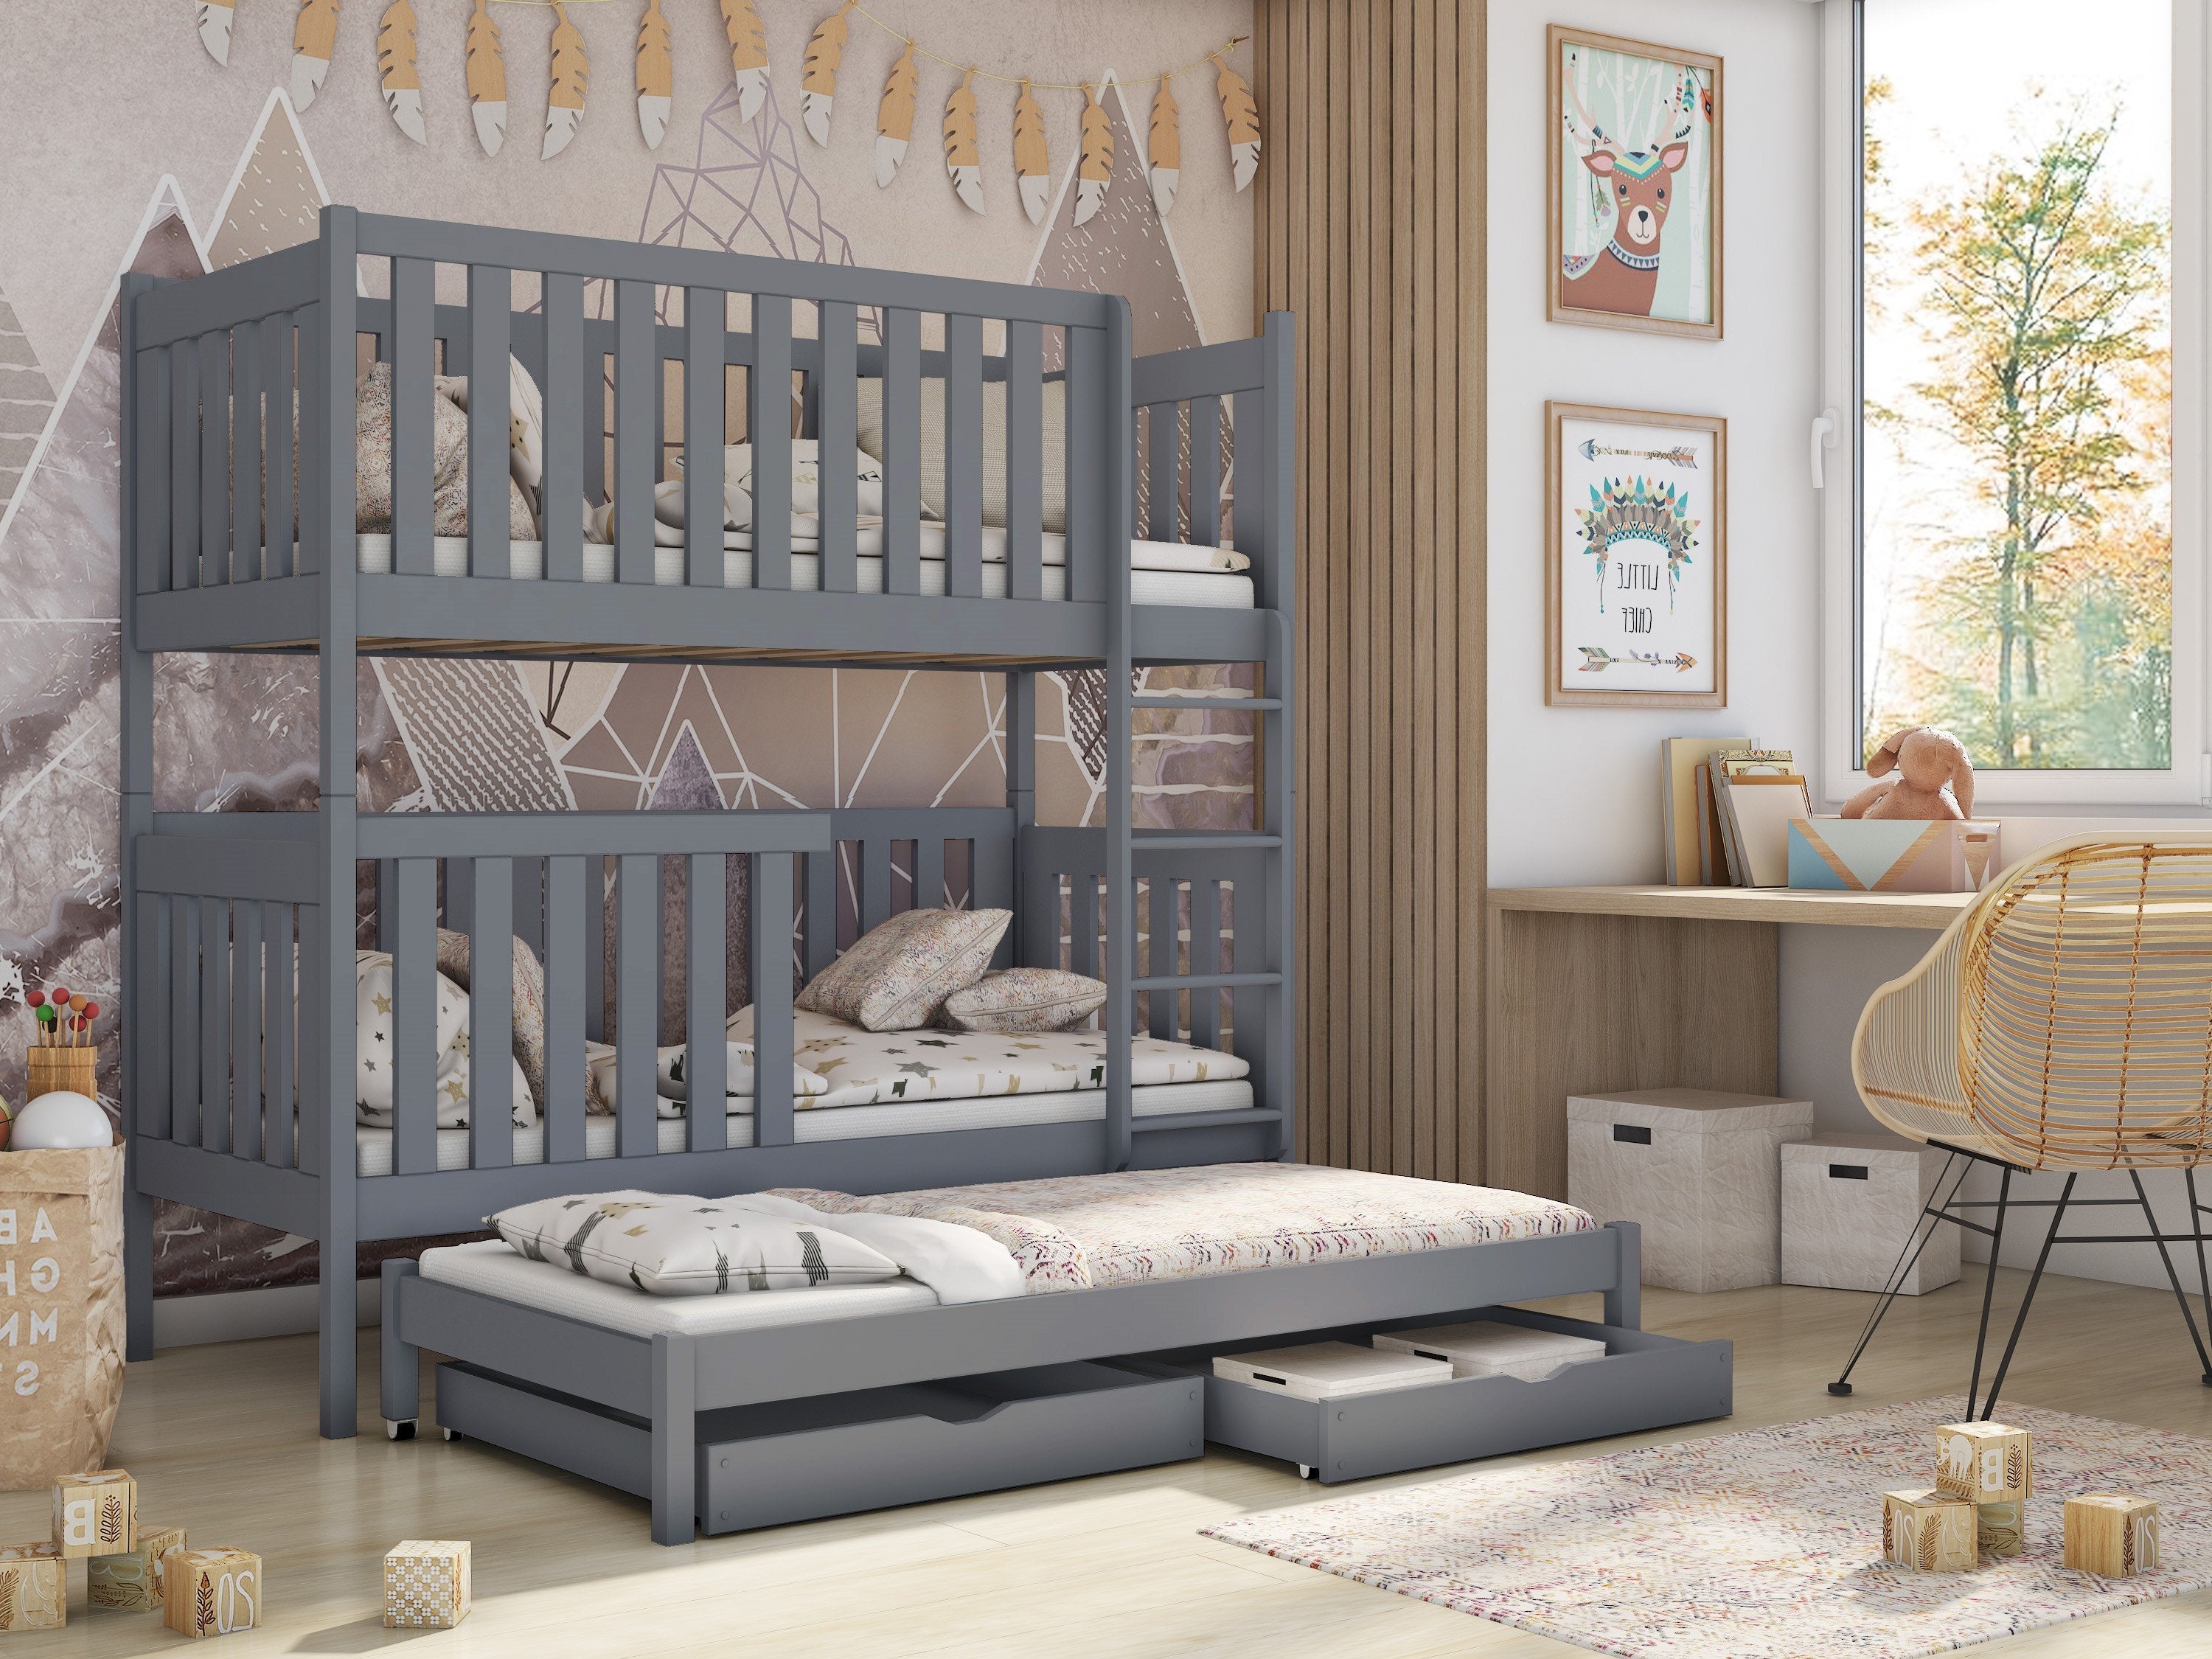 View Wooden Bunk Bed Emily with Trundle and Storage Grey Matt FoamBonnell Mattresses information